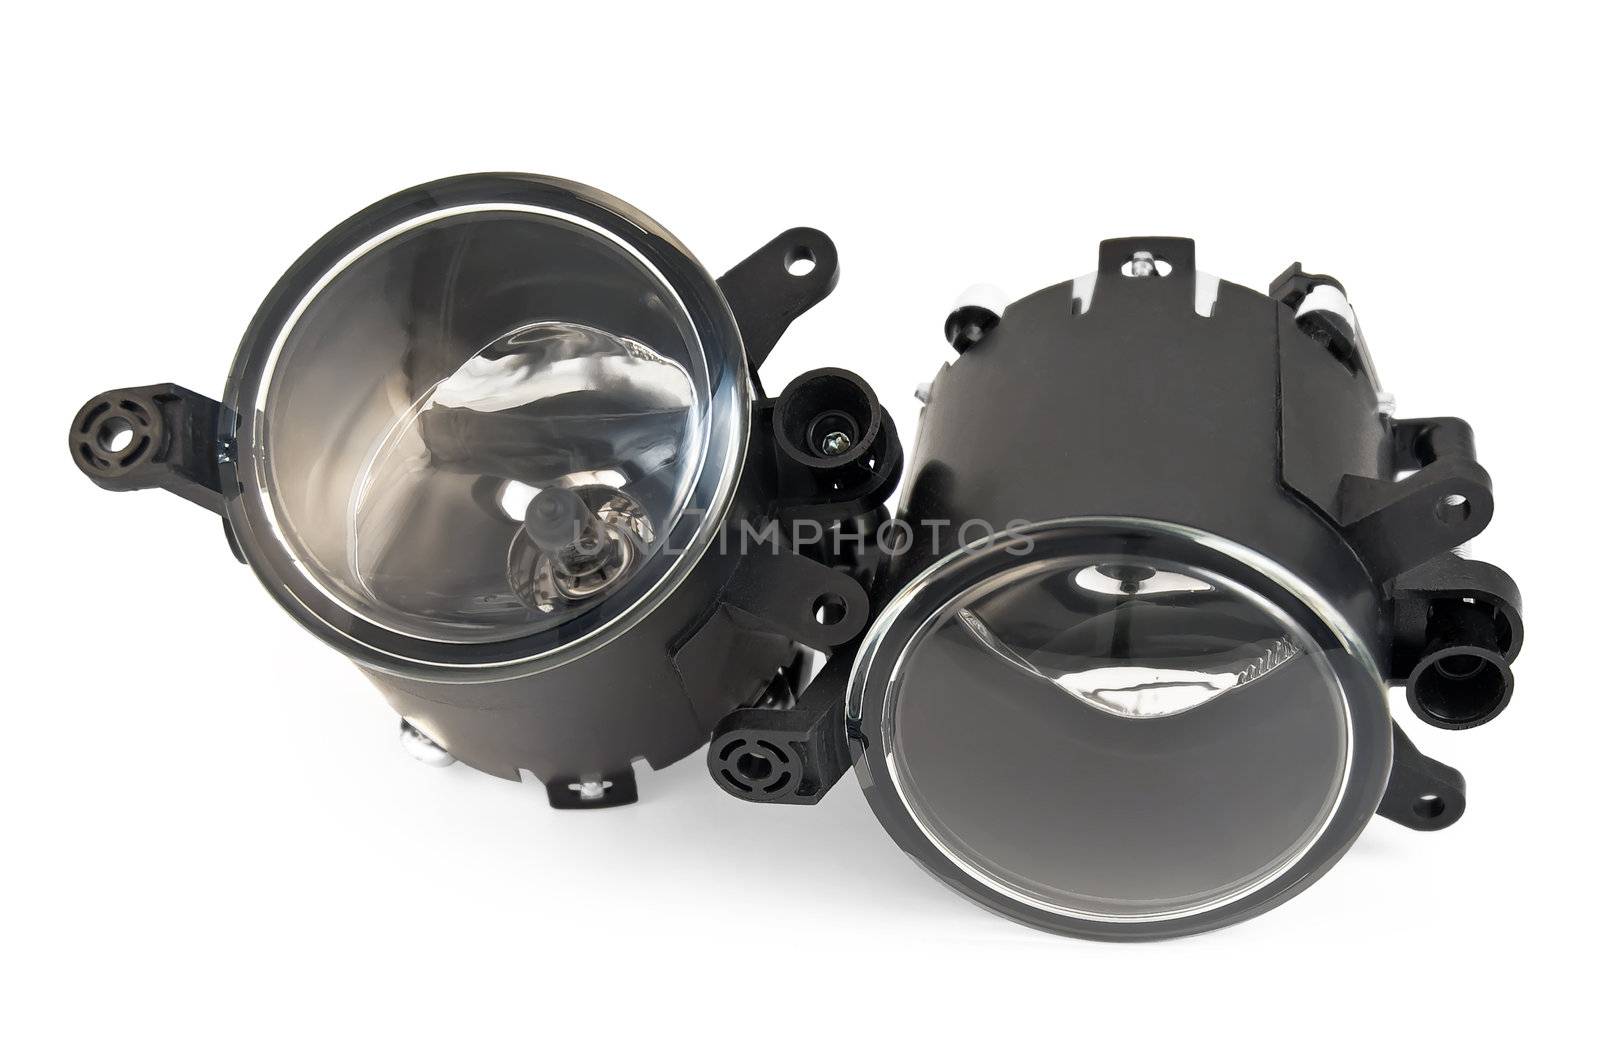 Couple fog lights for cars isolated on a white background